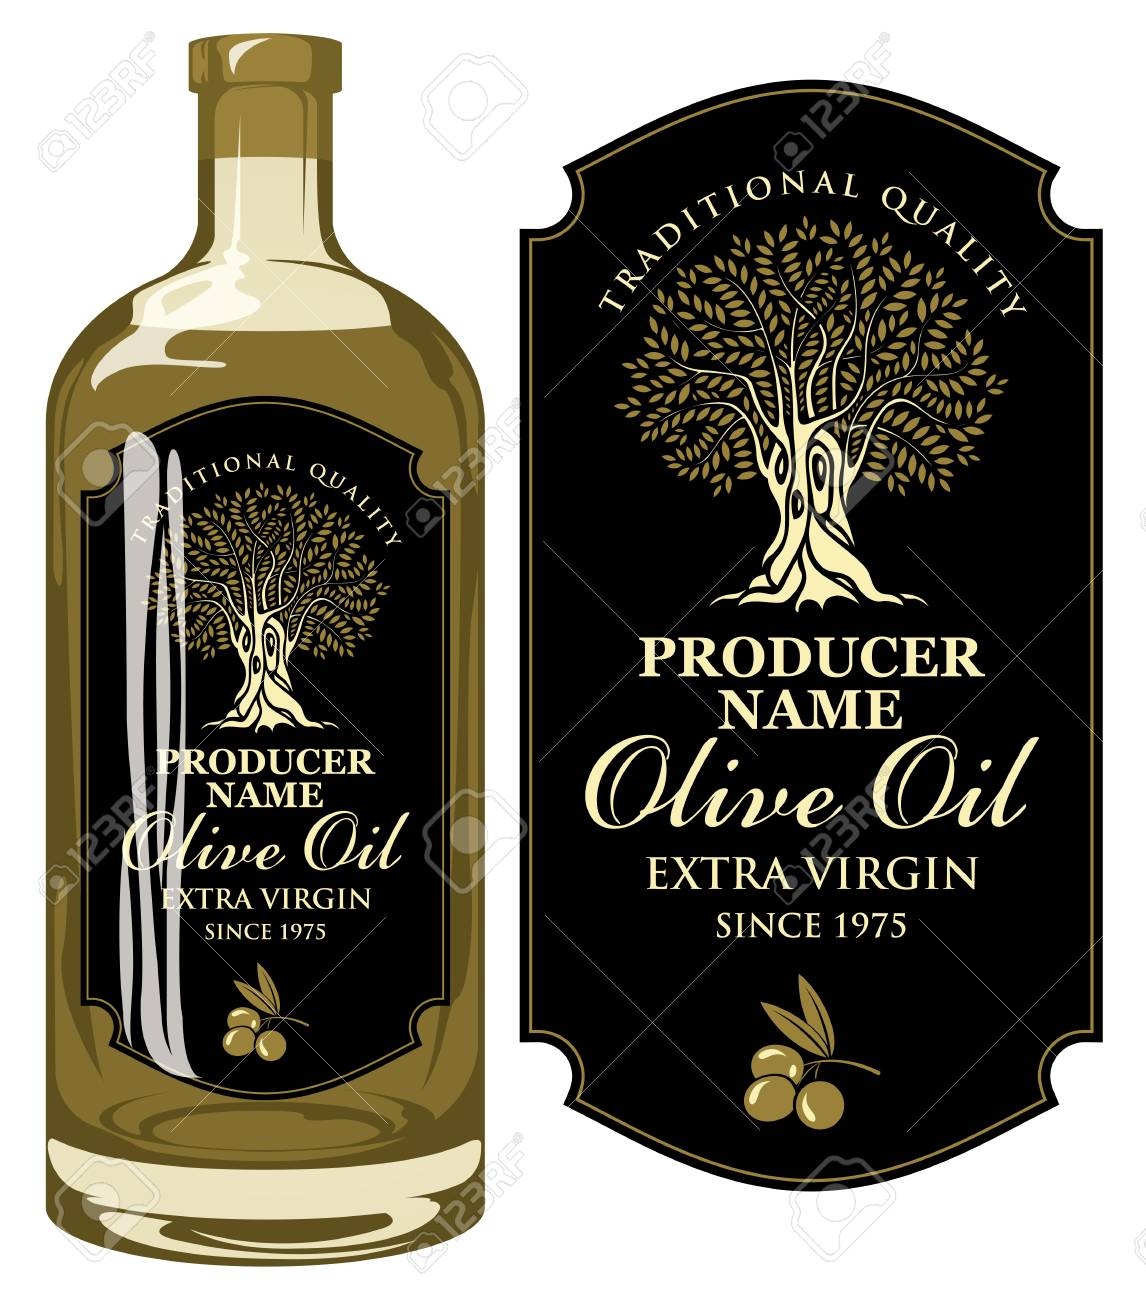 Vector Label For Extra Virgin Olive Oil With Handwritten Free